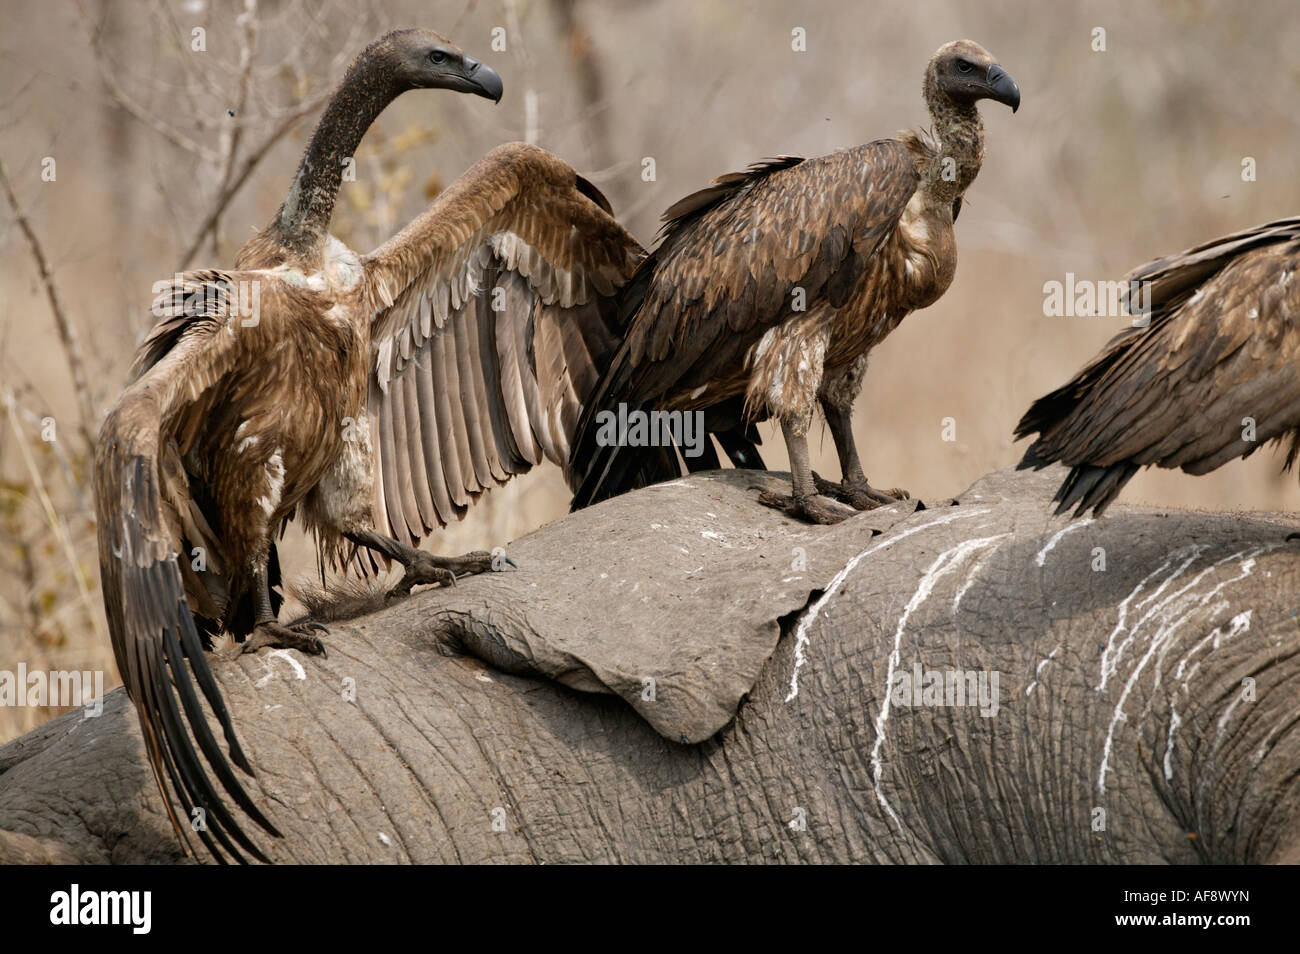 Whitebacked  vulture dominance display walking aggressively towards another with its wings outstretched Stock Photo